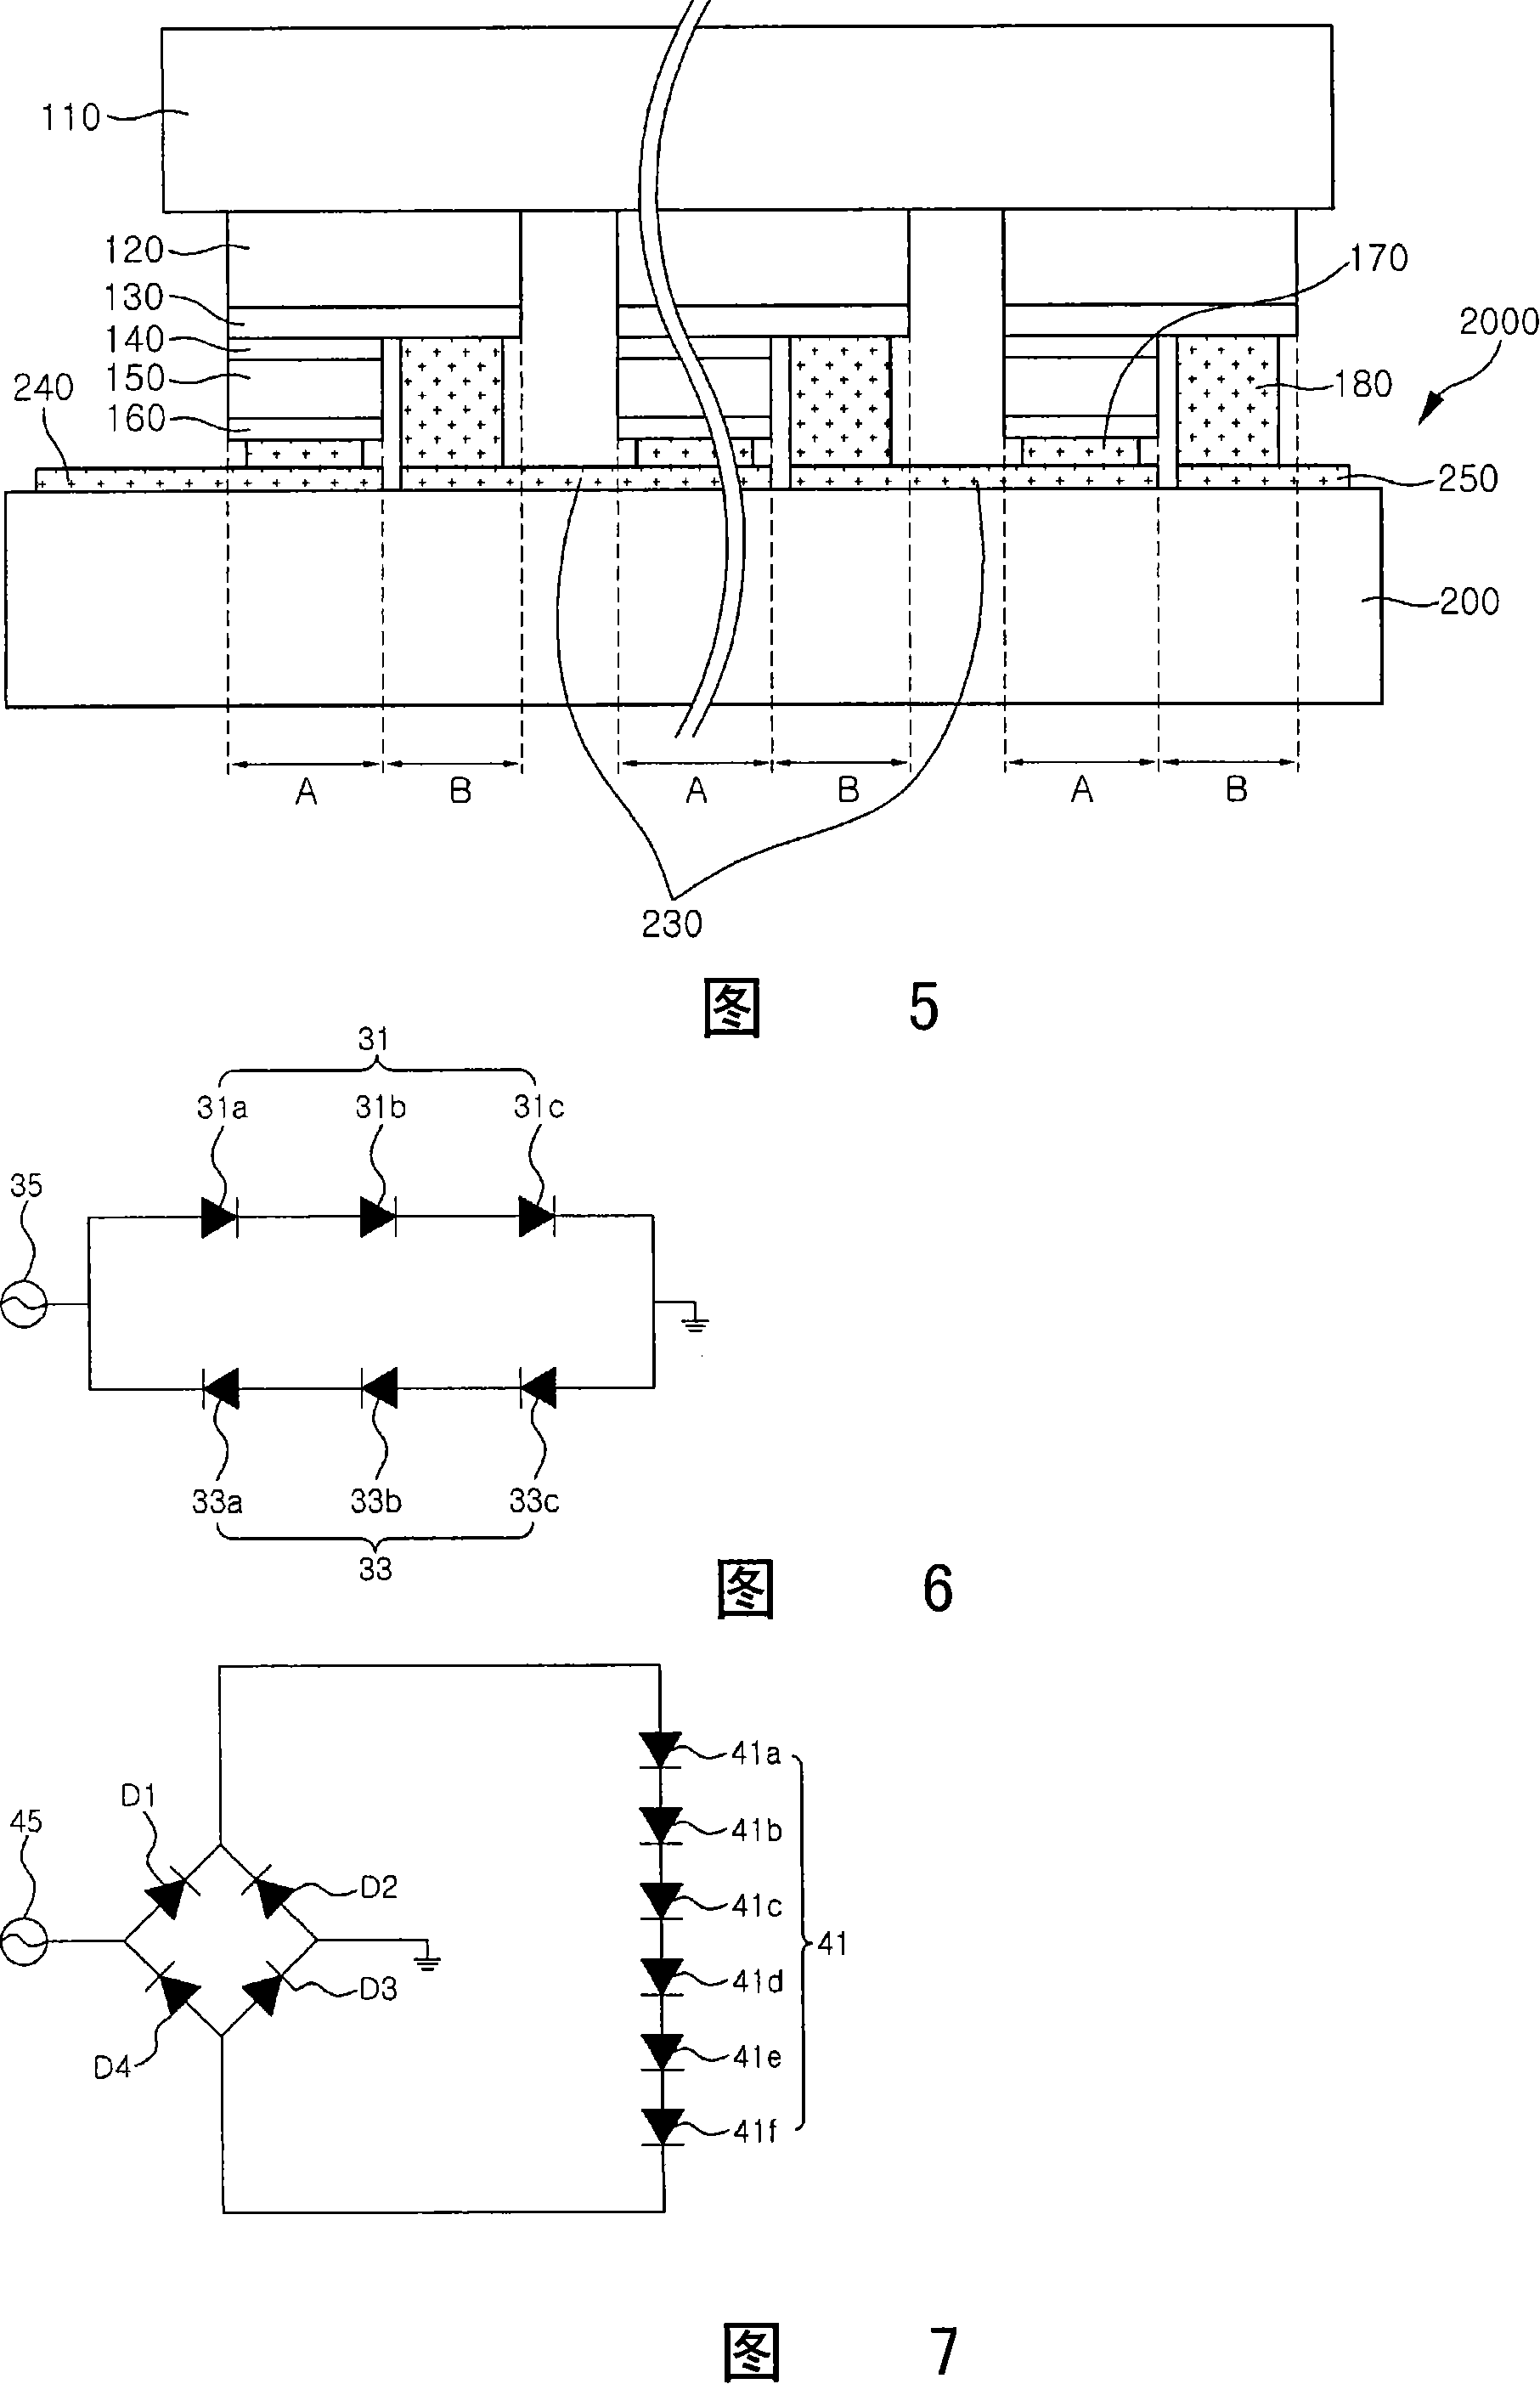 Led package having an array of light emitting cells coupled in series